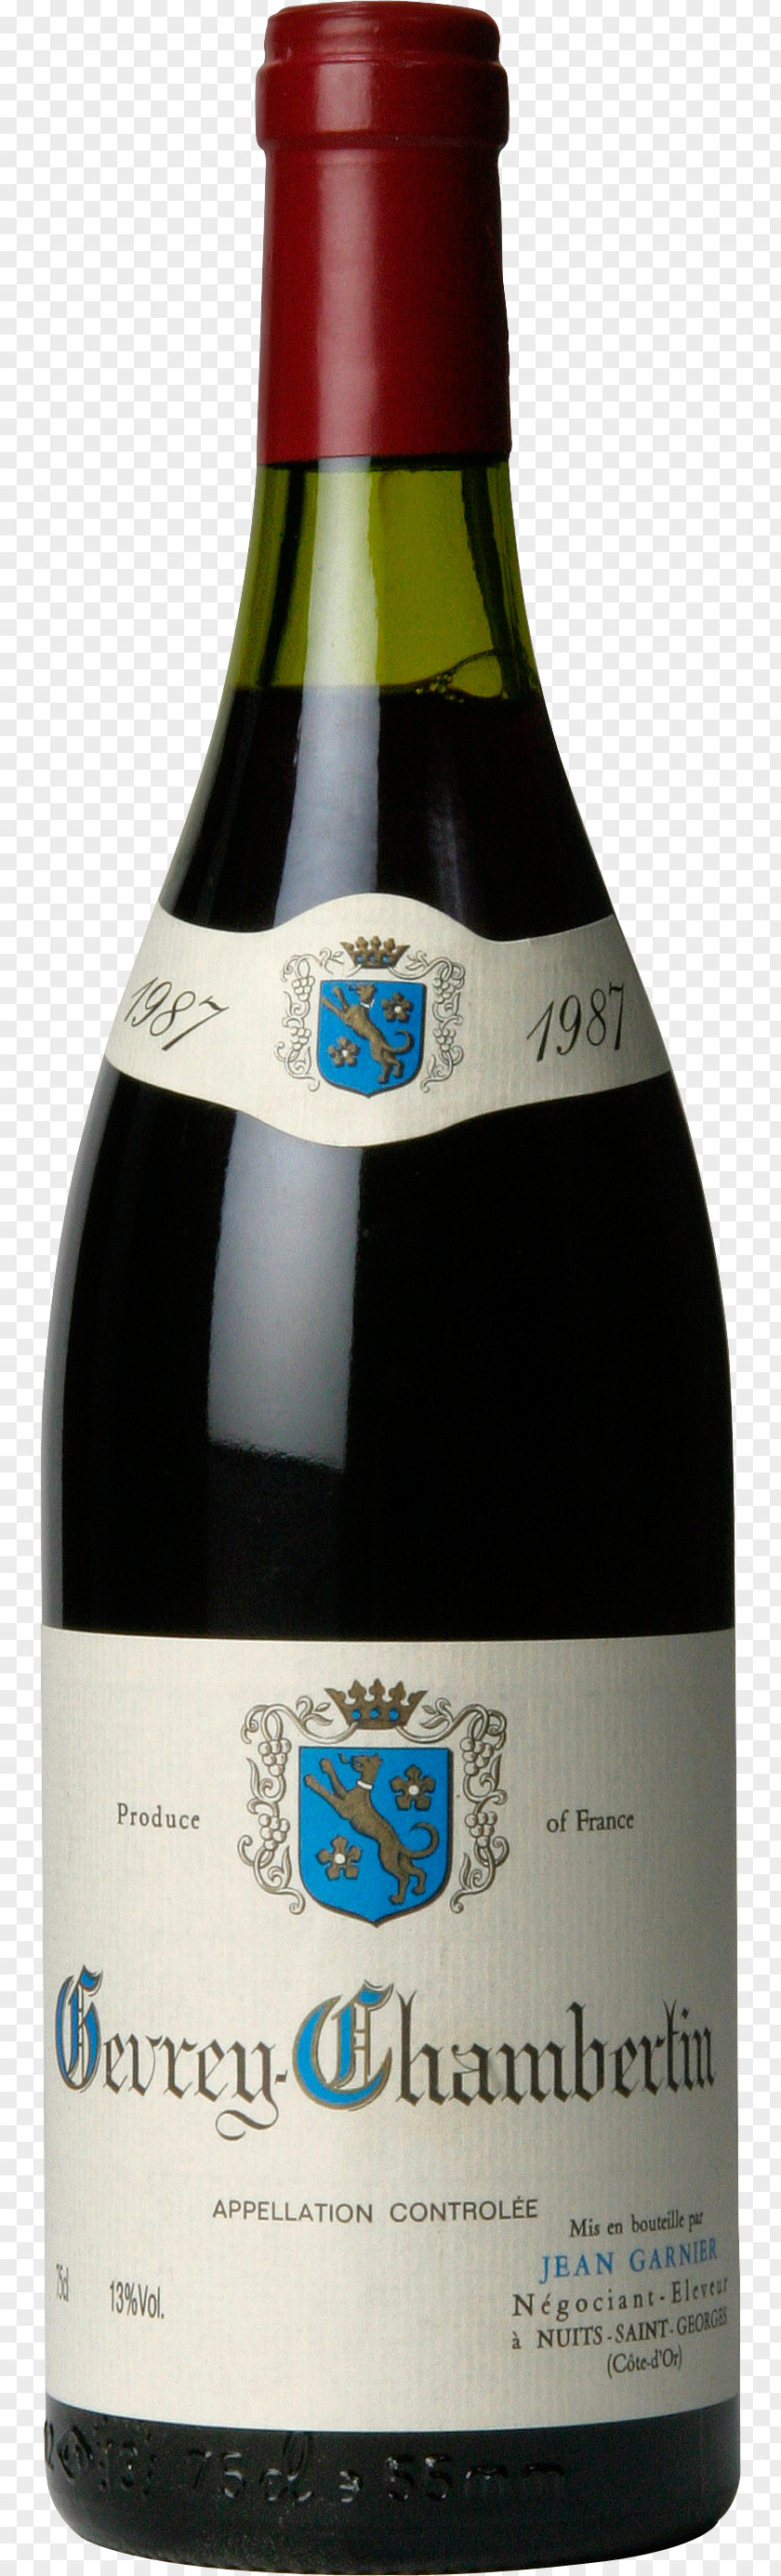 Wine Bottle Image Champagne PNG